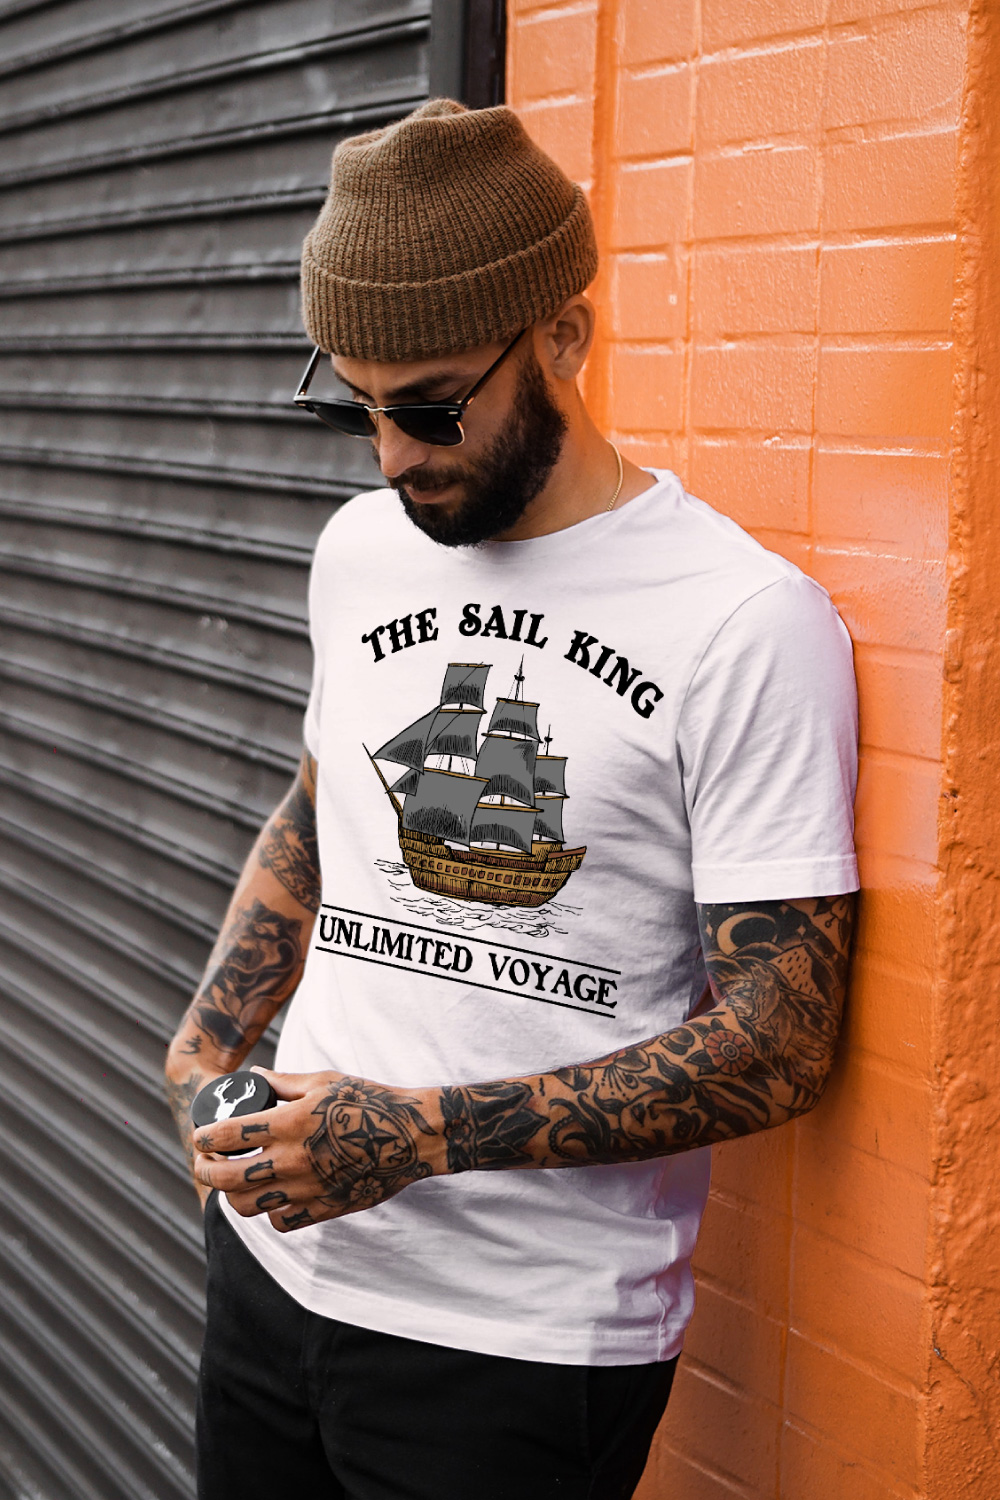 The sail king unlimited voyage tshirt design pinterest preview image.